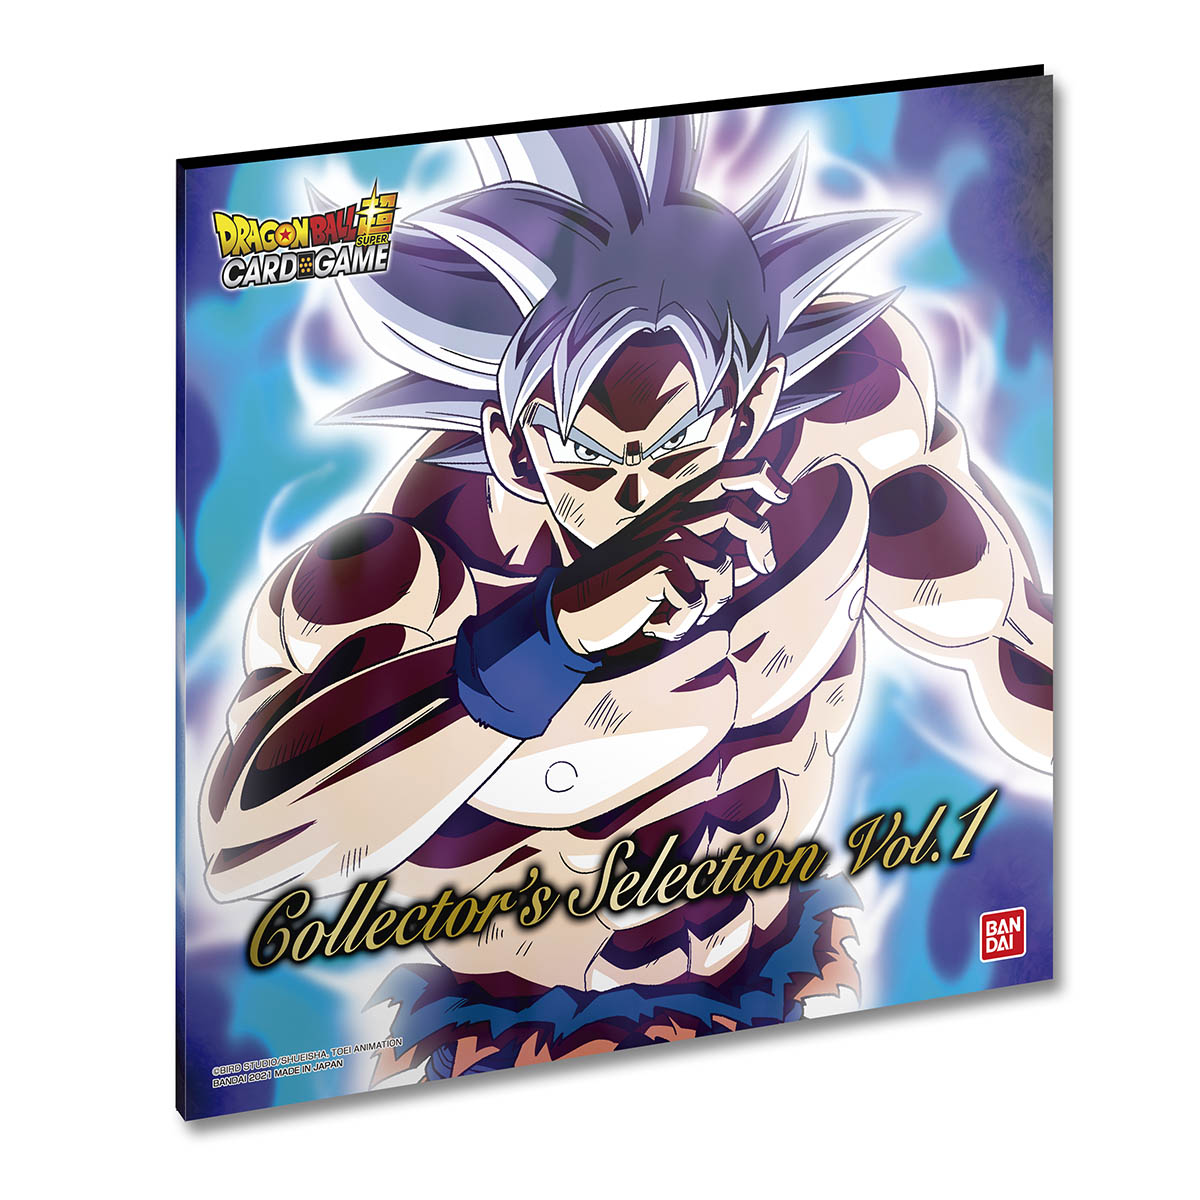 DRAGON BALL SUPER CARD GAME COLLECTOR'S SELECTION  | DRAGON BALL |  PREMIUM BANDAI USA Online Store for Action Figures, Model Kits, Toys and  more